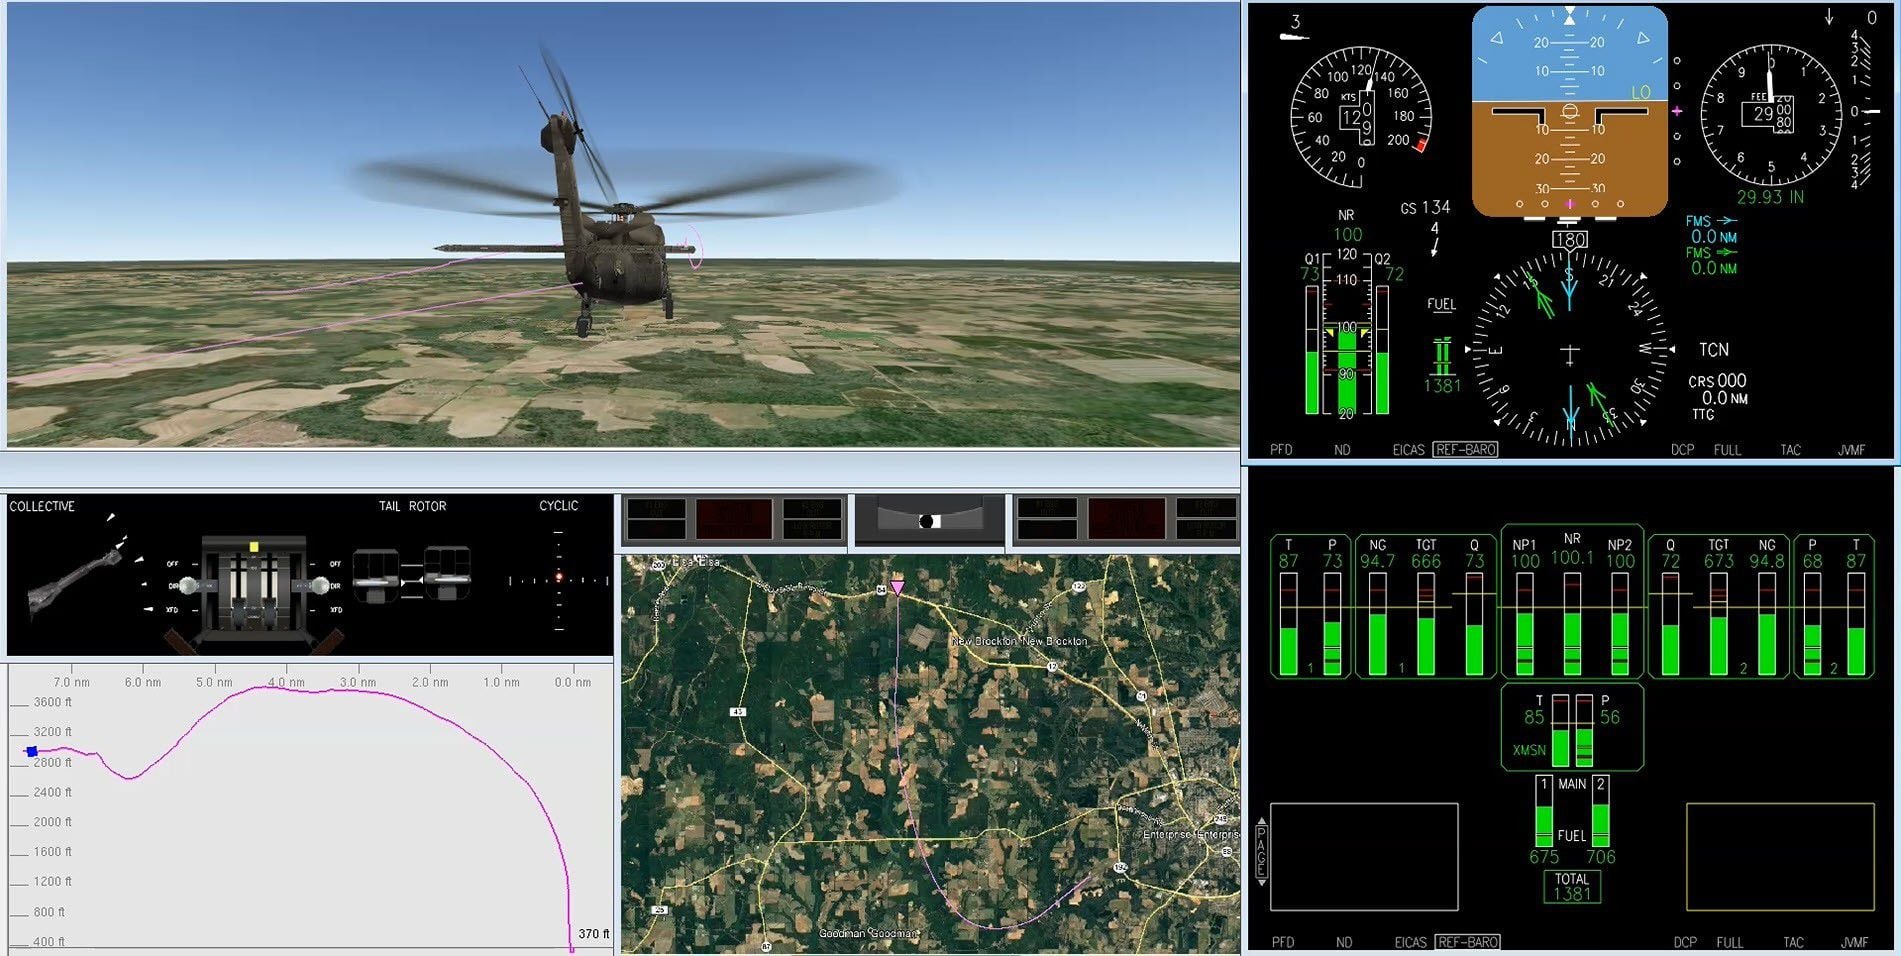 n example of a mishap recreation animation video created from recorded flight data and audio developed by the U.S. Army Combat Readiness Center’s Digital Collections, Analysis and Integration Laboratory. (Combat Readiness Center/Army)